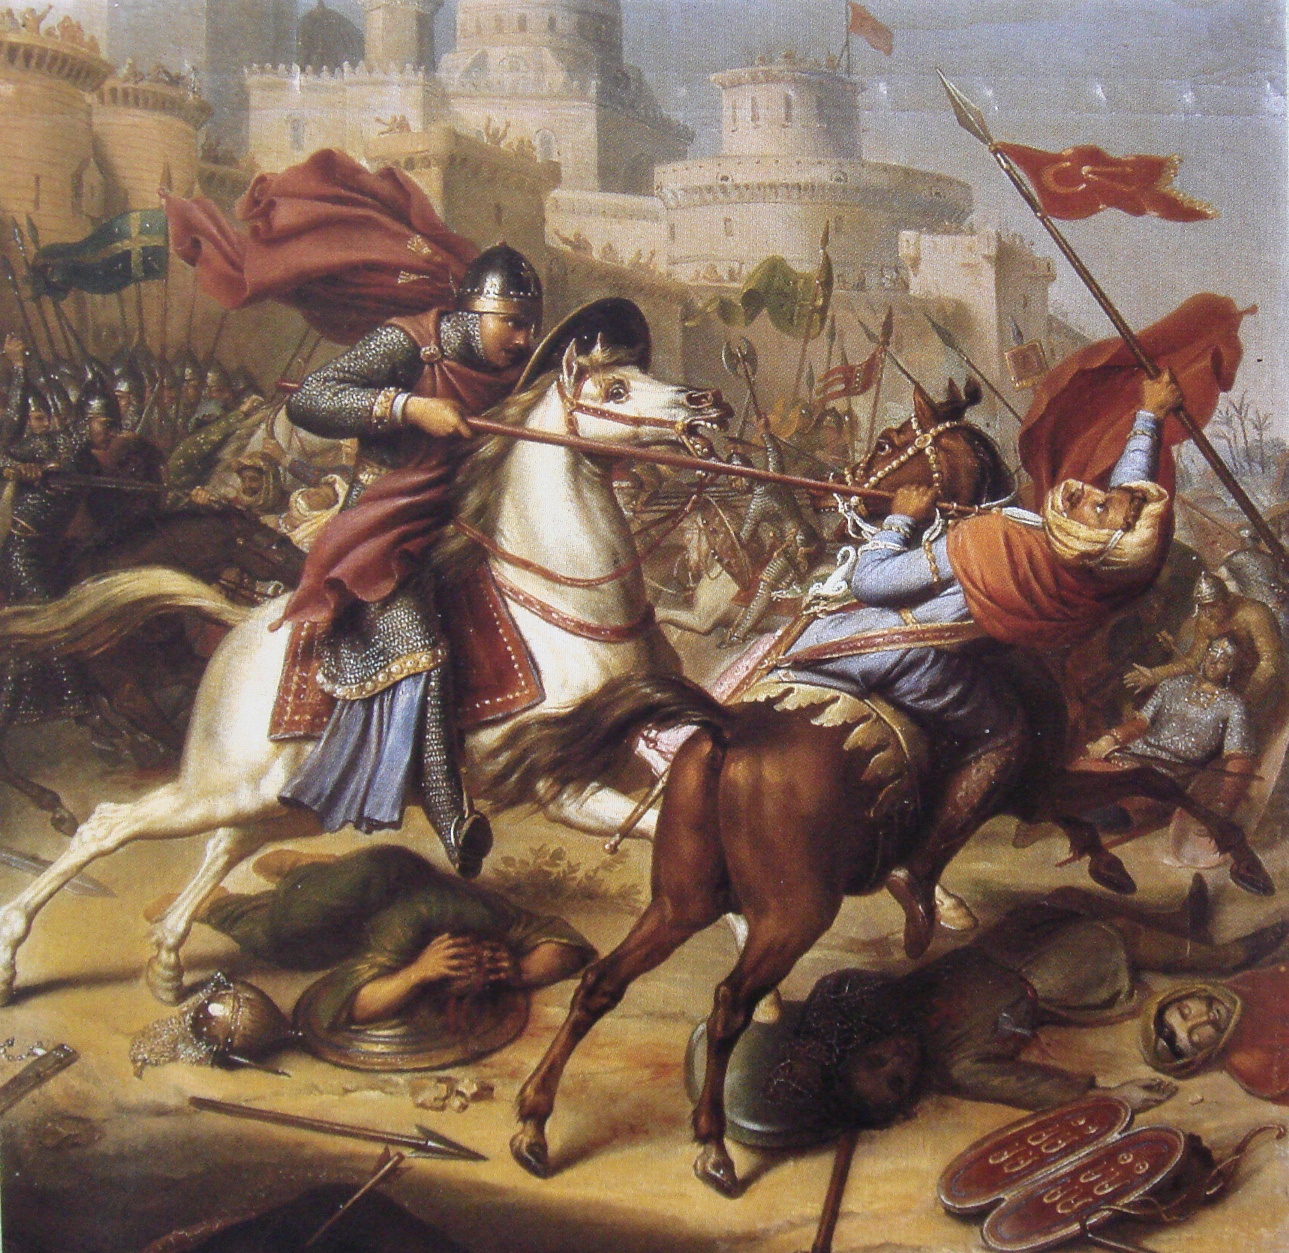 robert-of-normandy-at-the-siege-of-antioch-8992.jpg